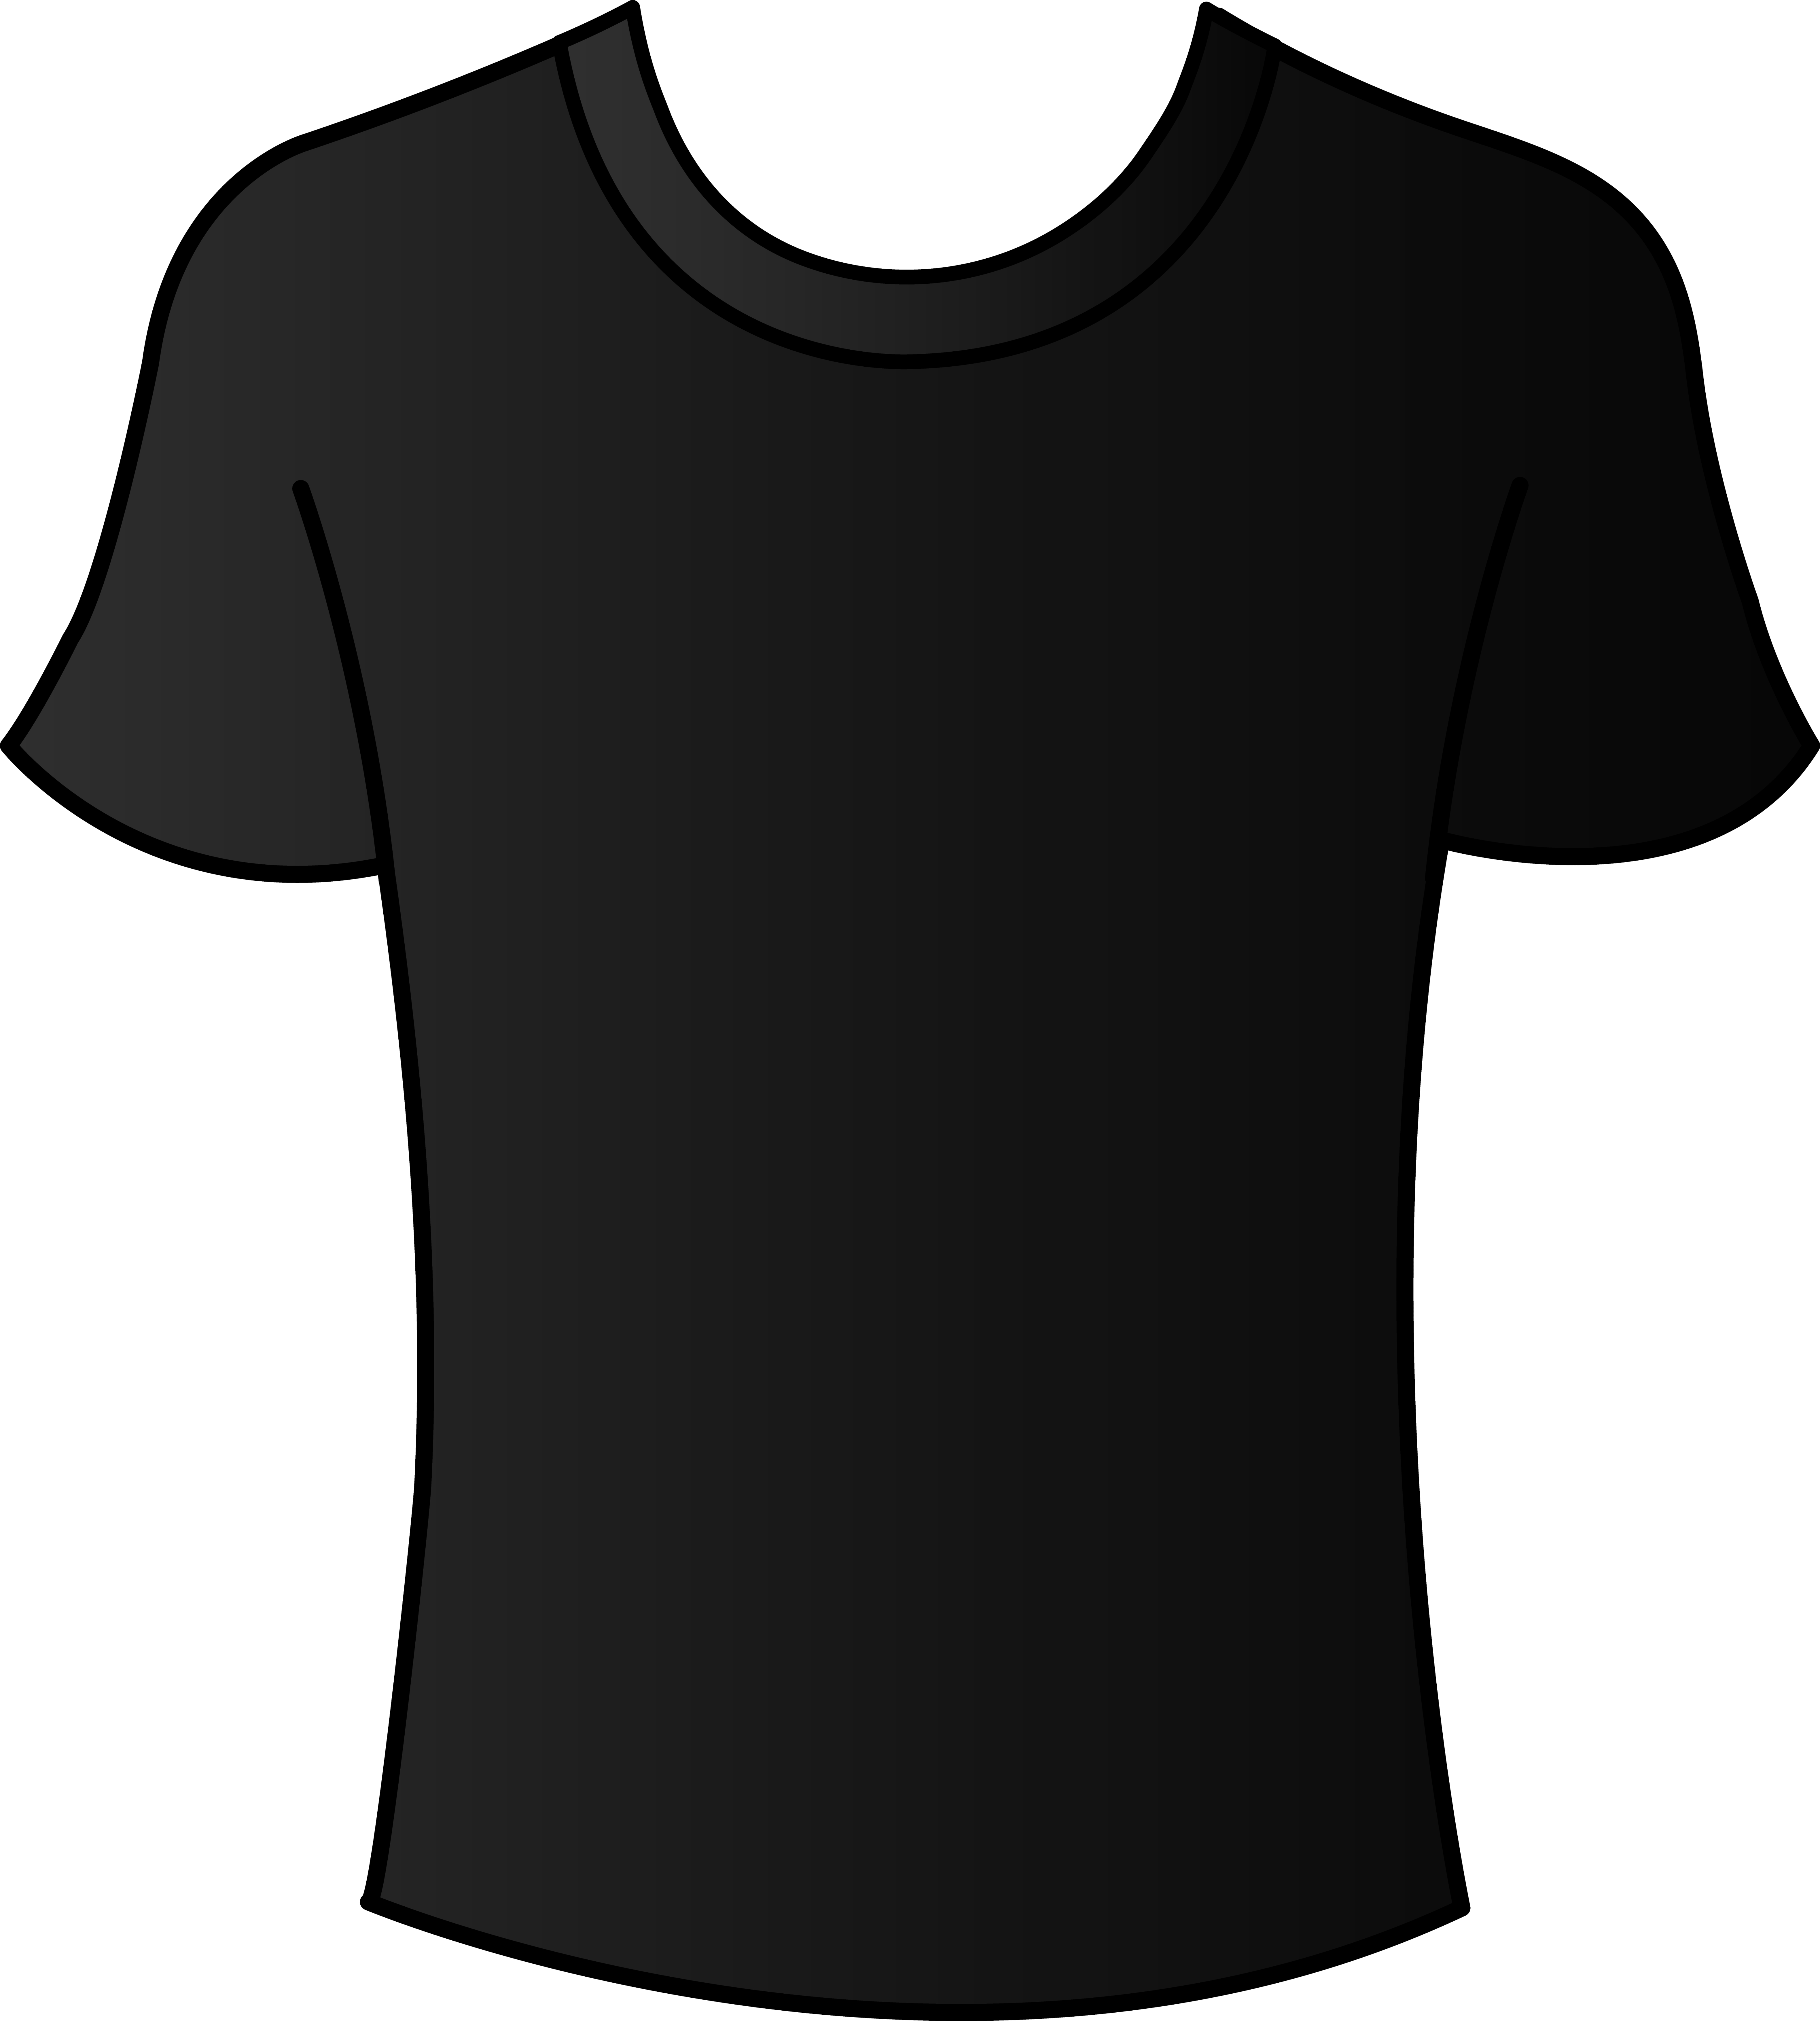 Back Of Shirt Template. front and back t shirt outline clipart ...